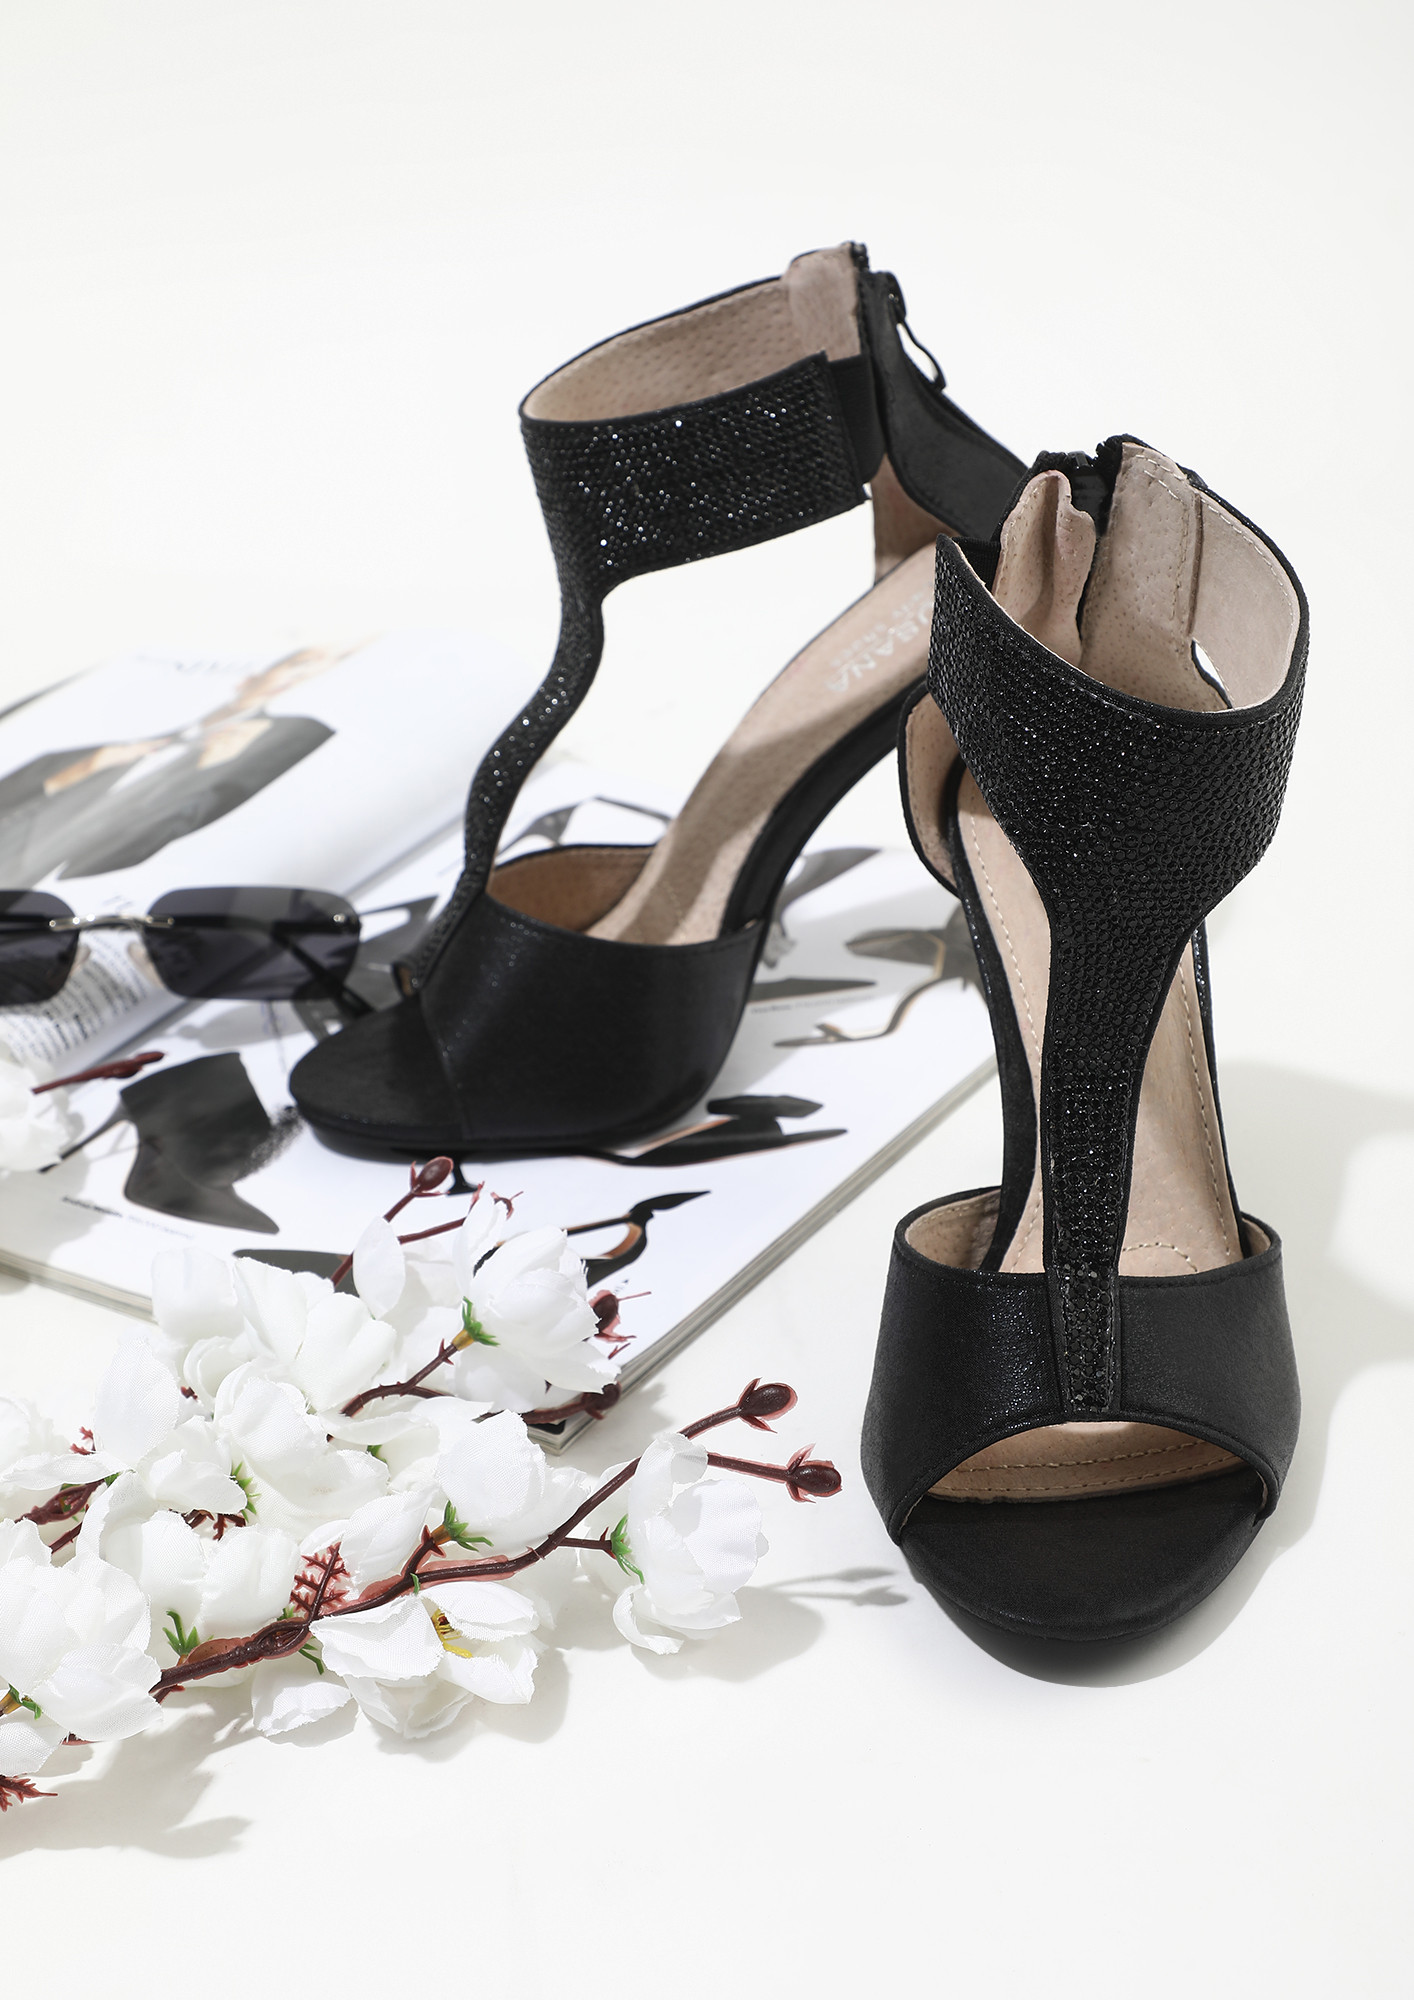 Black Ankle-Strap Heeled Sandals - CHARLES & KEITH IN